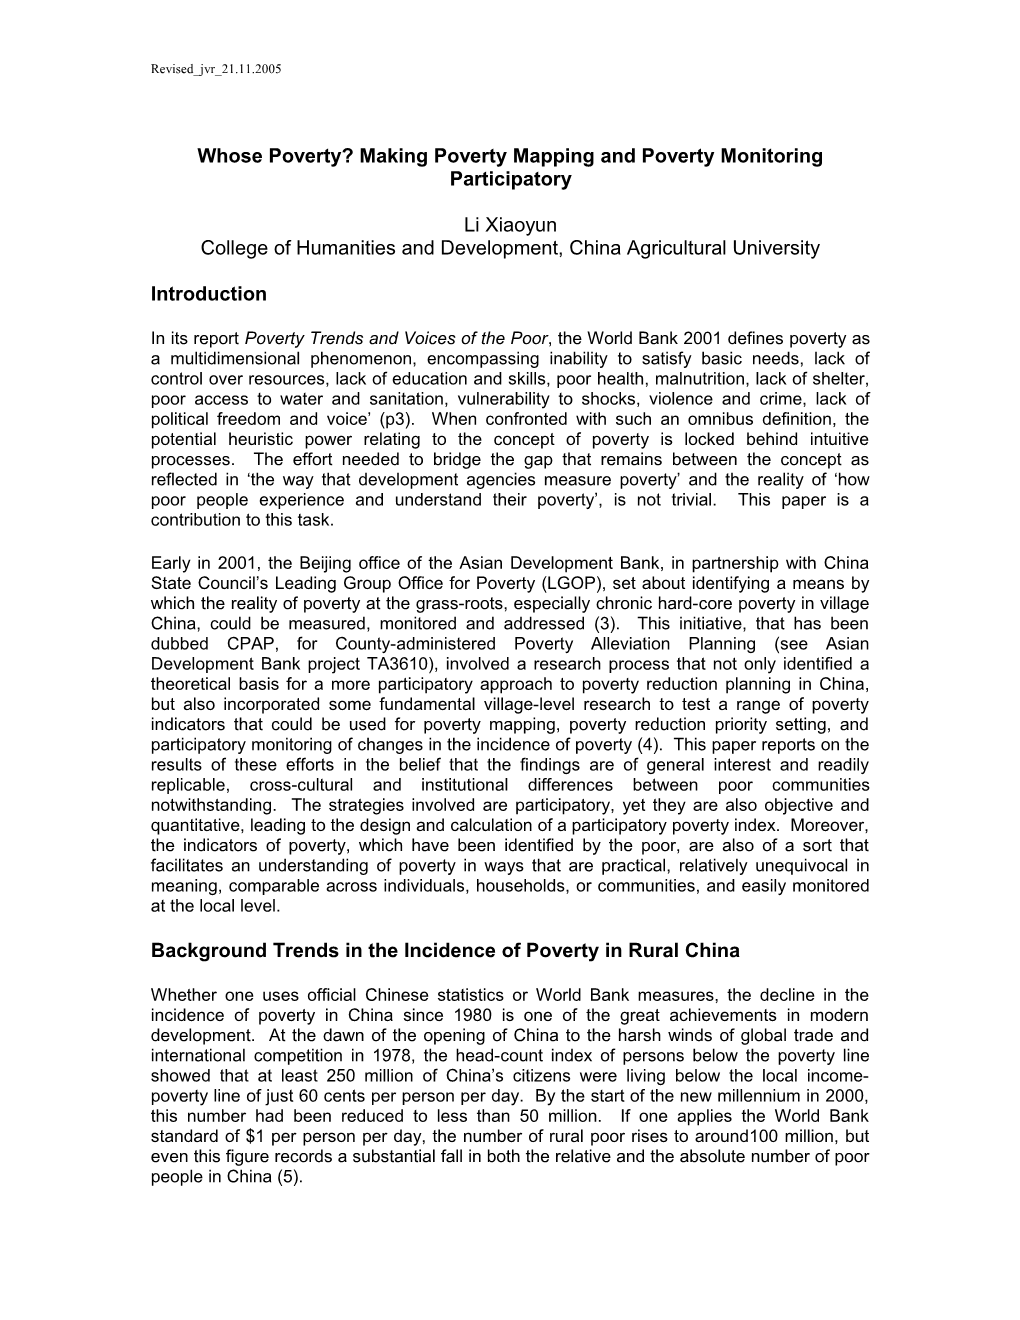 Whose Poverty? Making Poverty Mapping and Poverty Monitoring Participatory